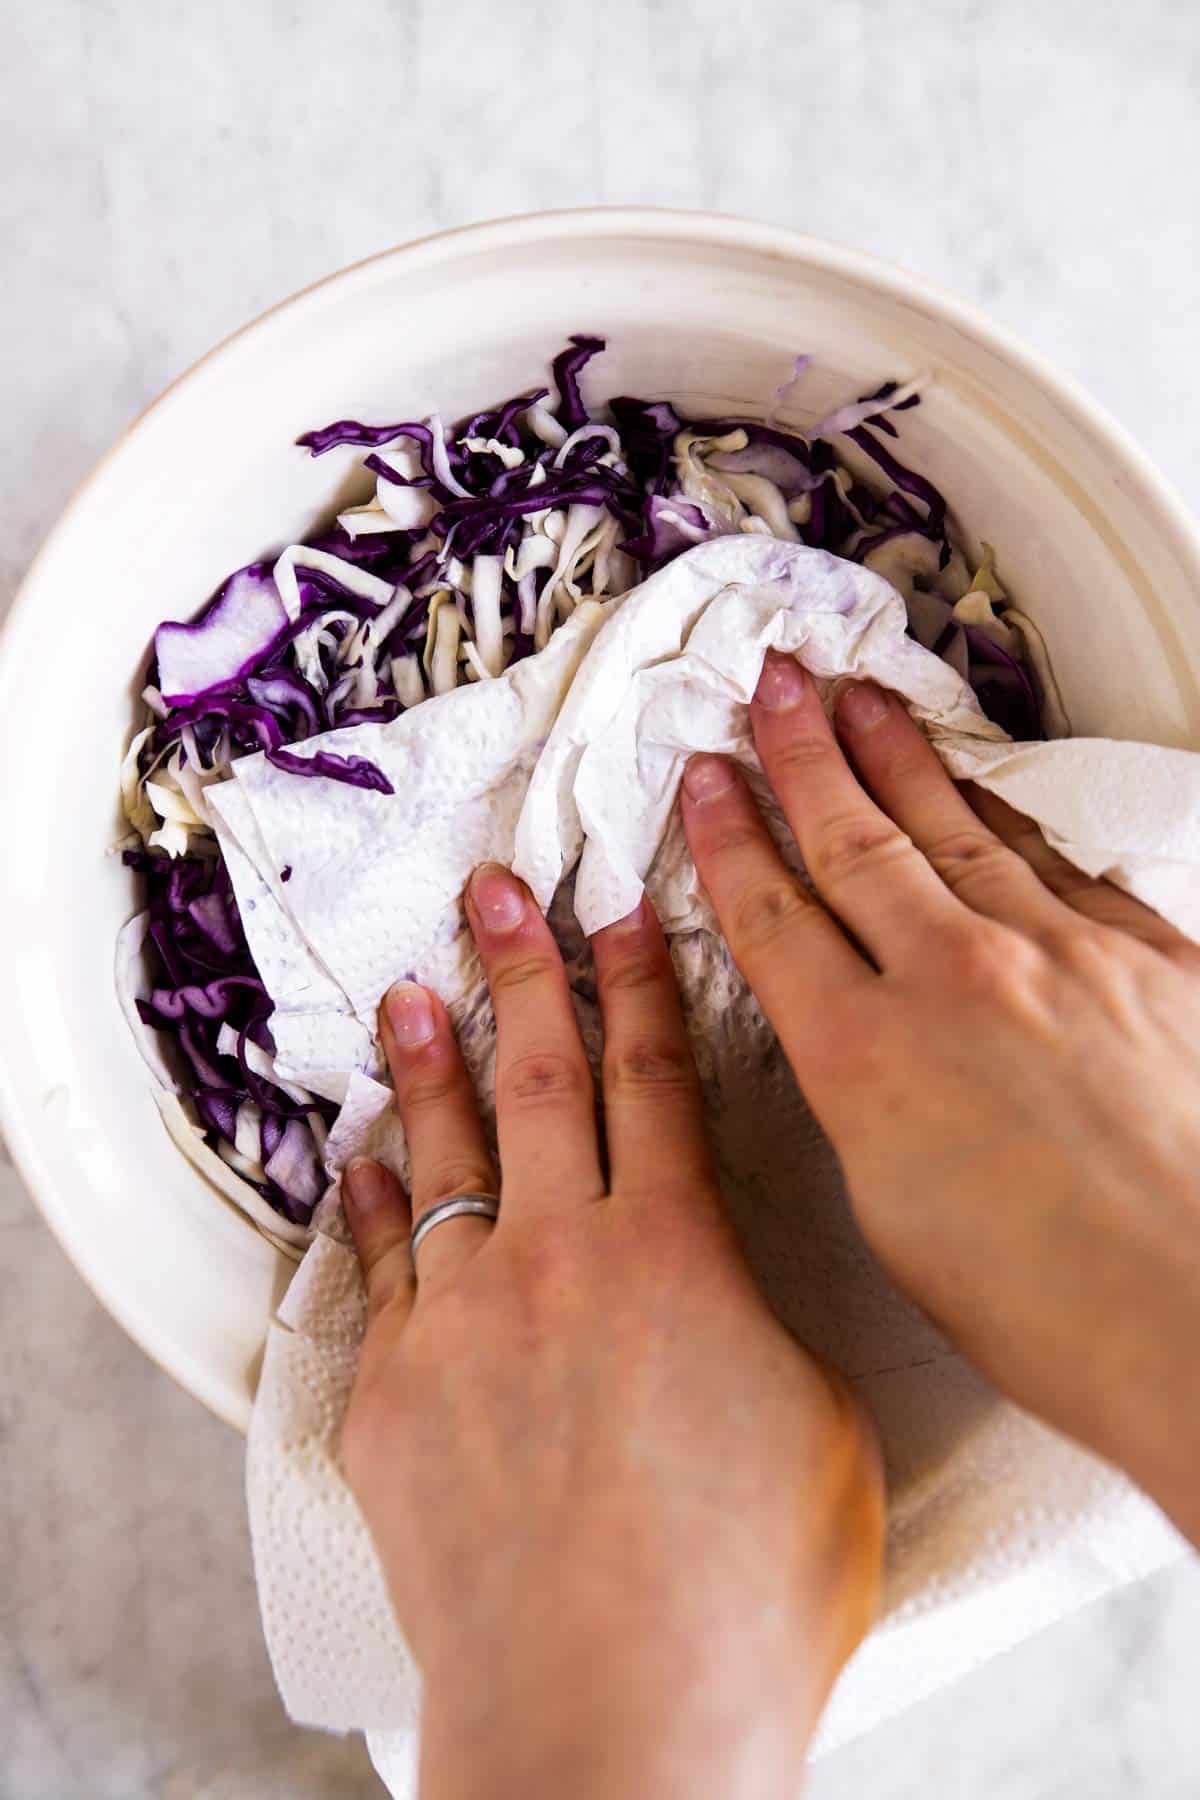 female hands patting dry cabbage in large mixing bowl